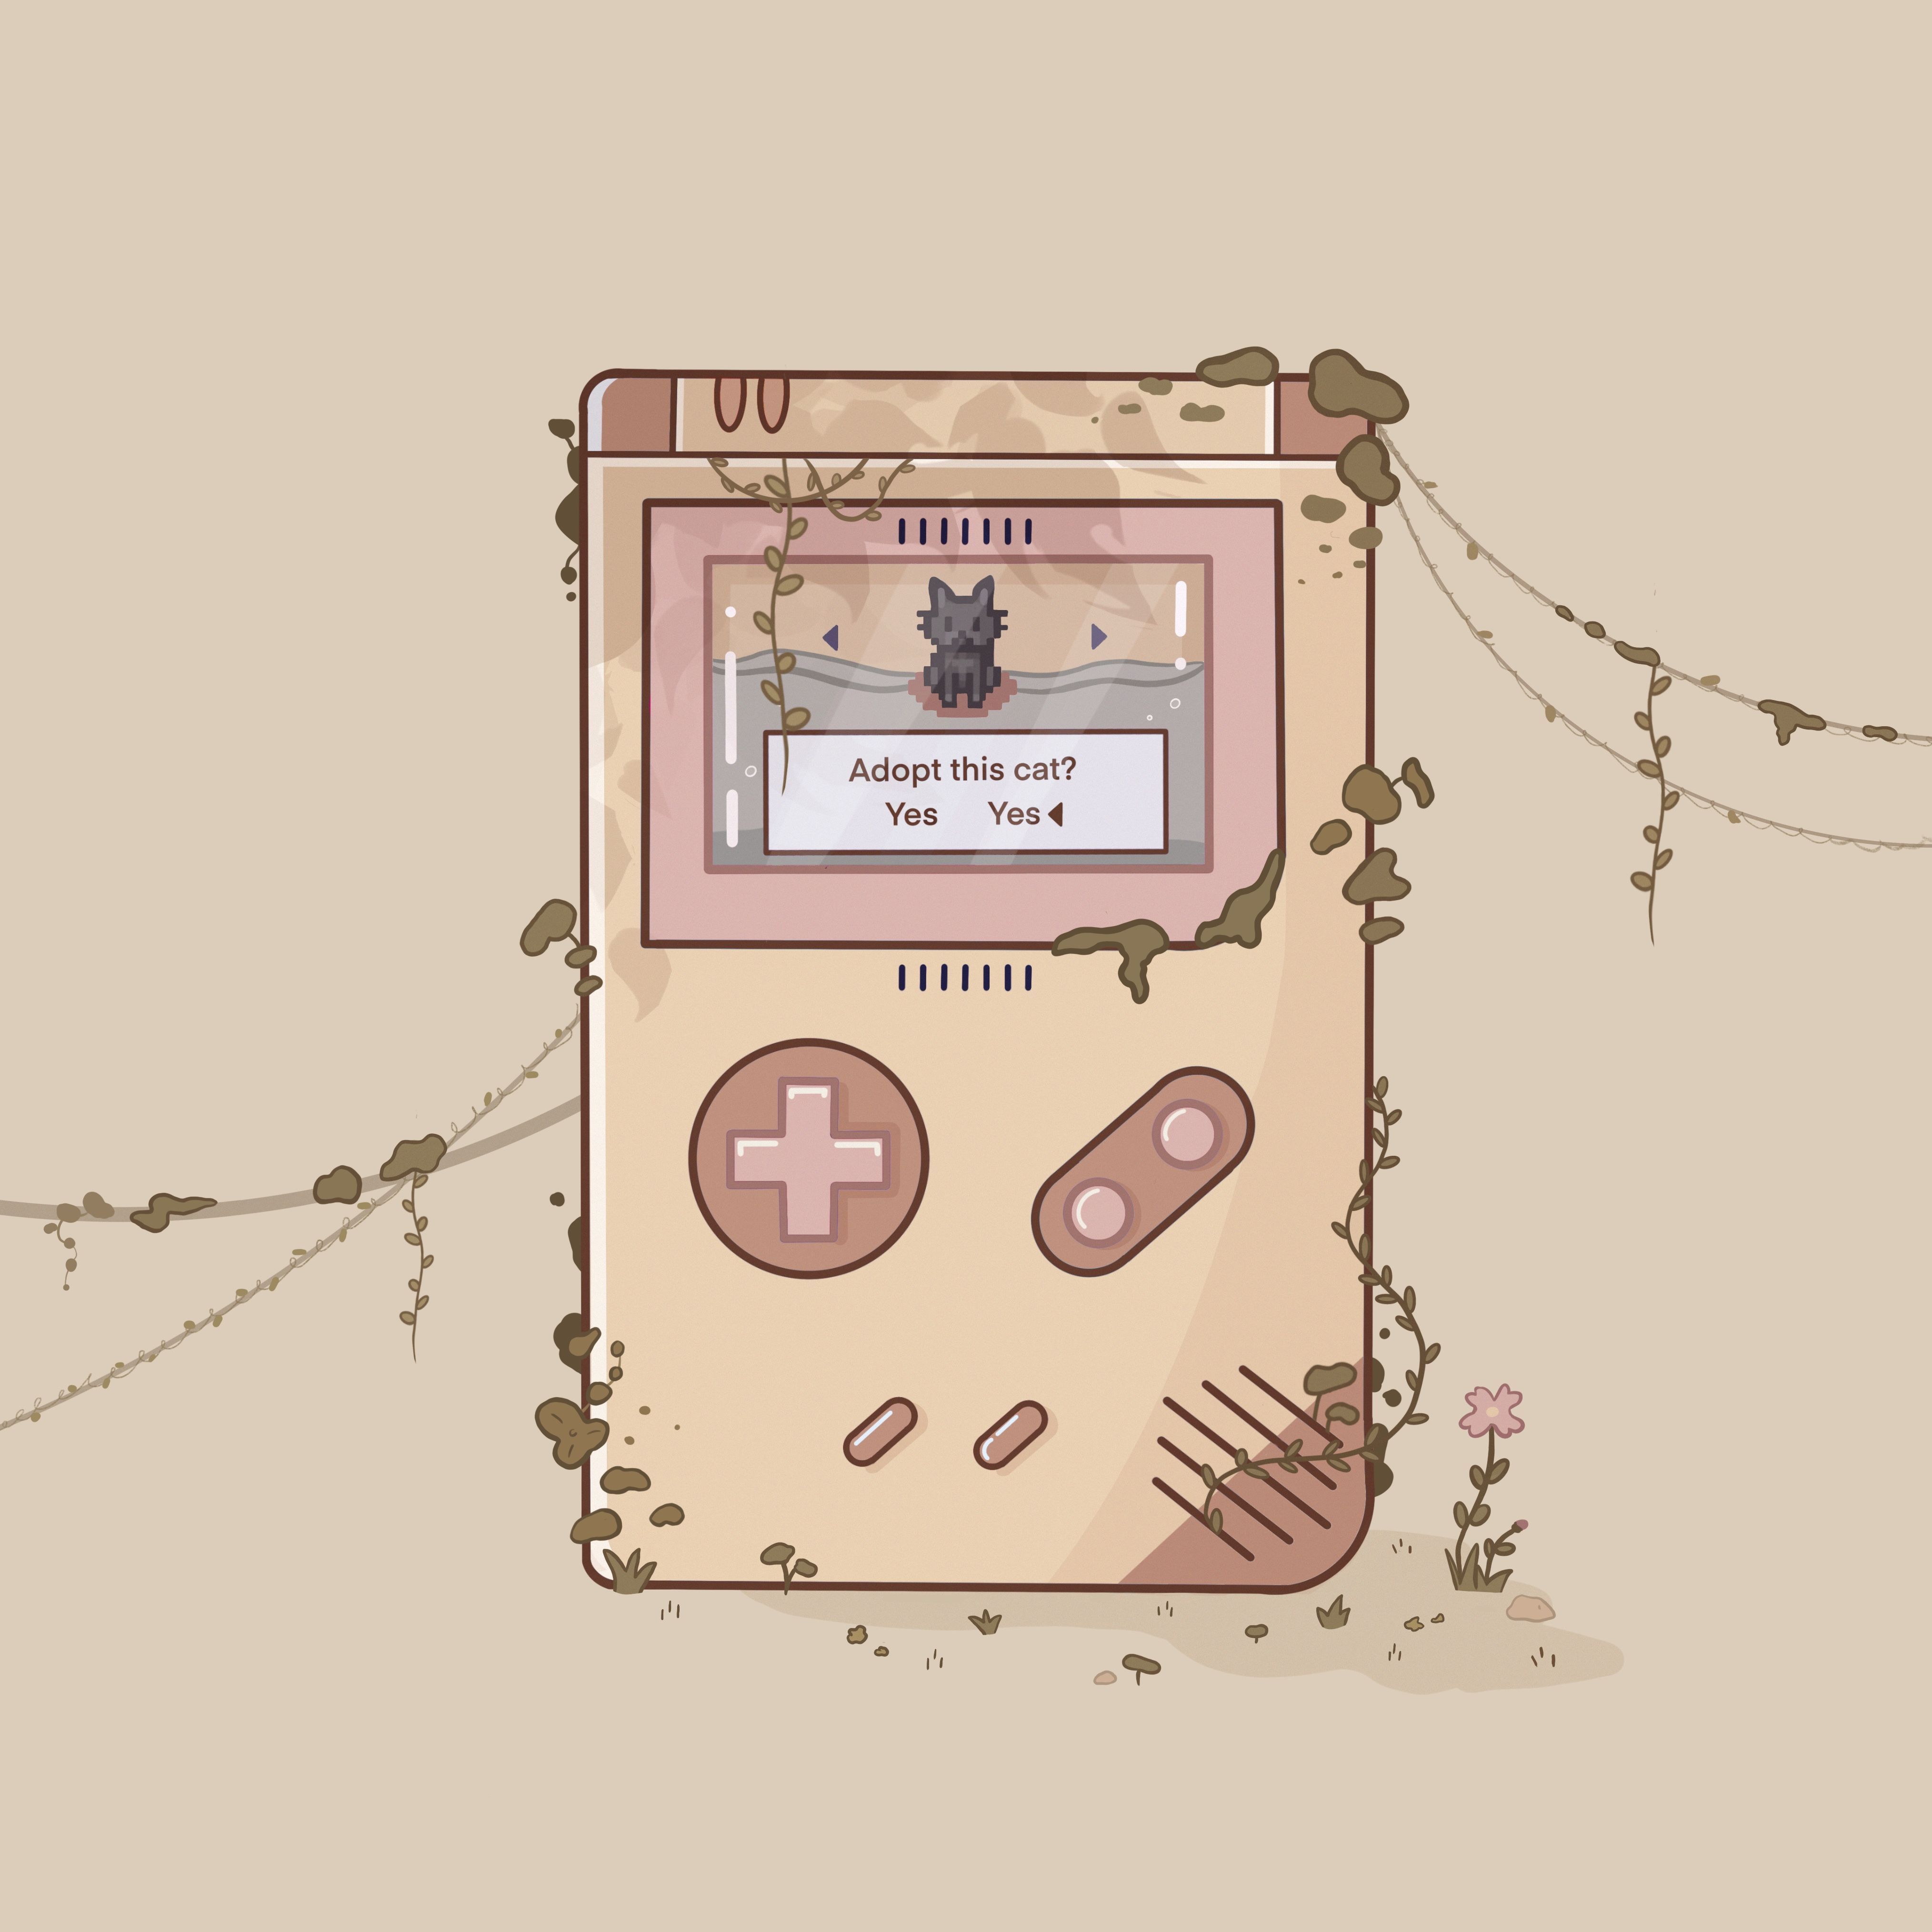 A Gameboy with vines growing on it and a cat on the screen - Game Boy